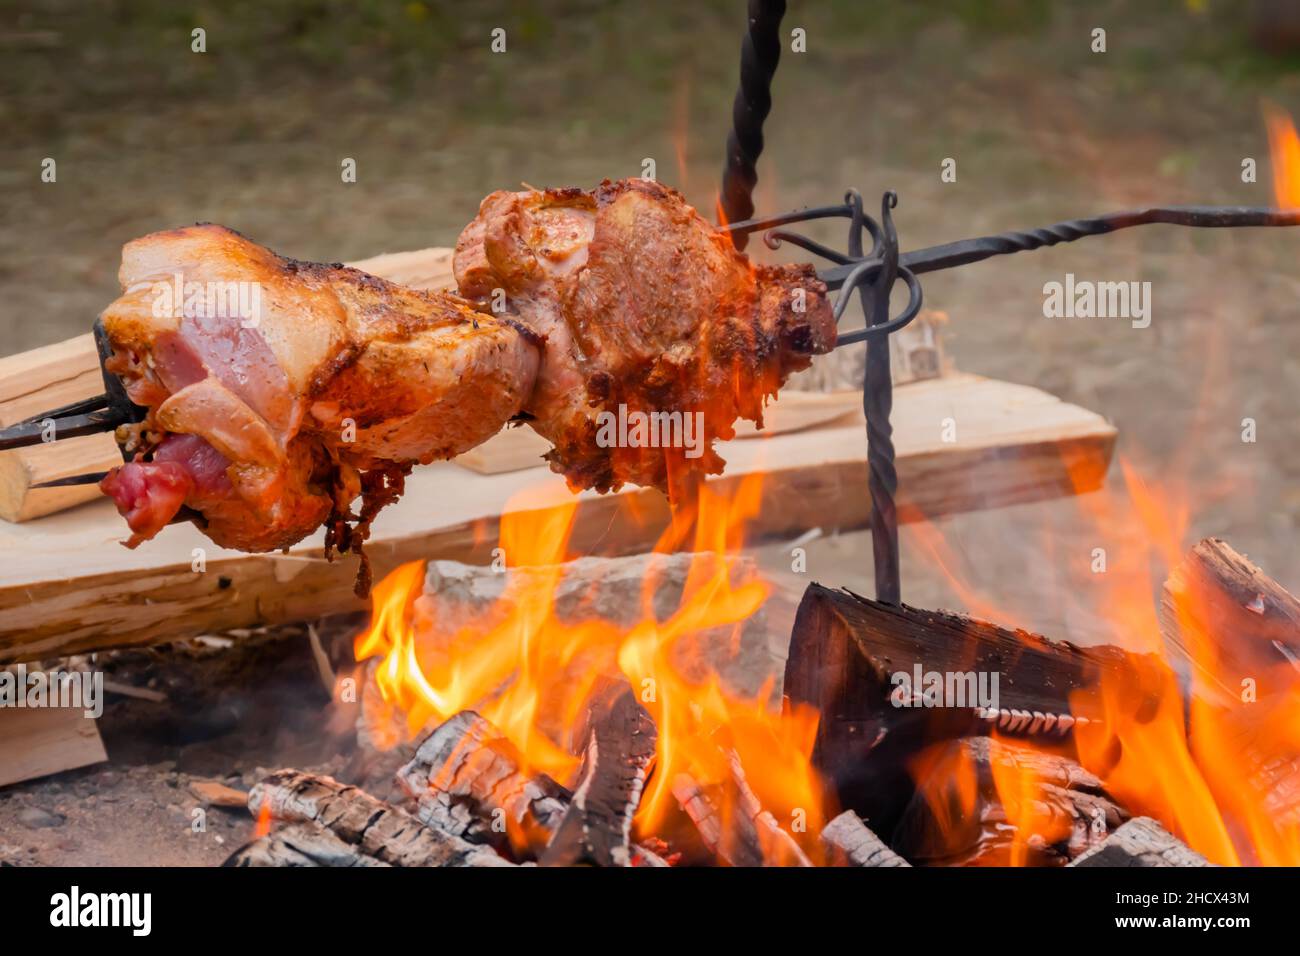 Process of cooking large meat peaces on spit over open fire Stock Photo